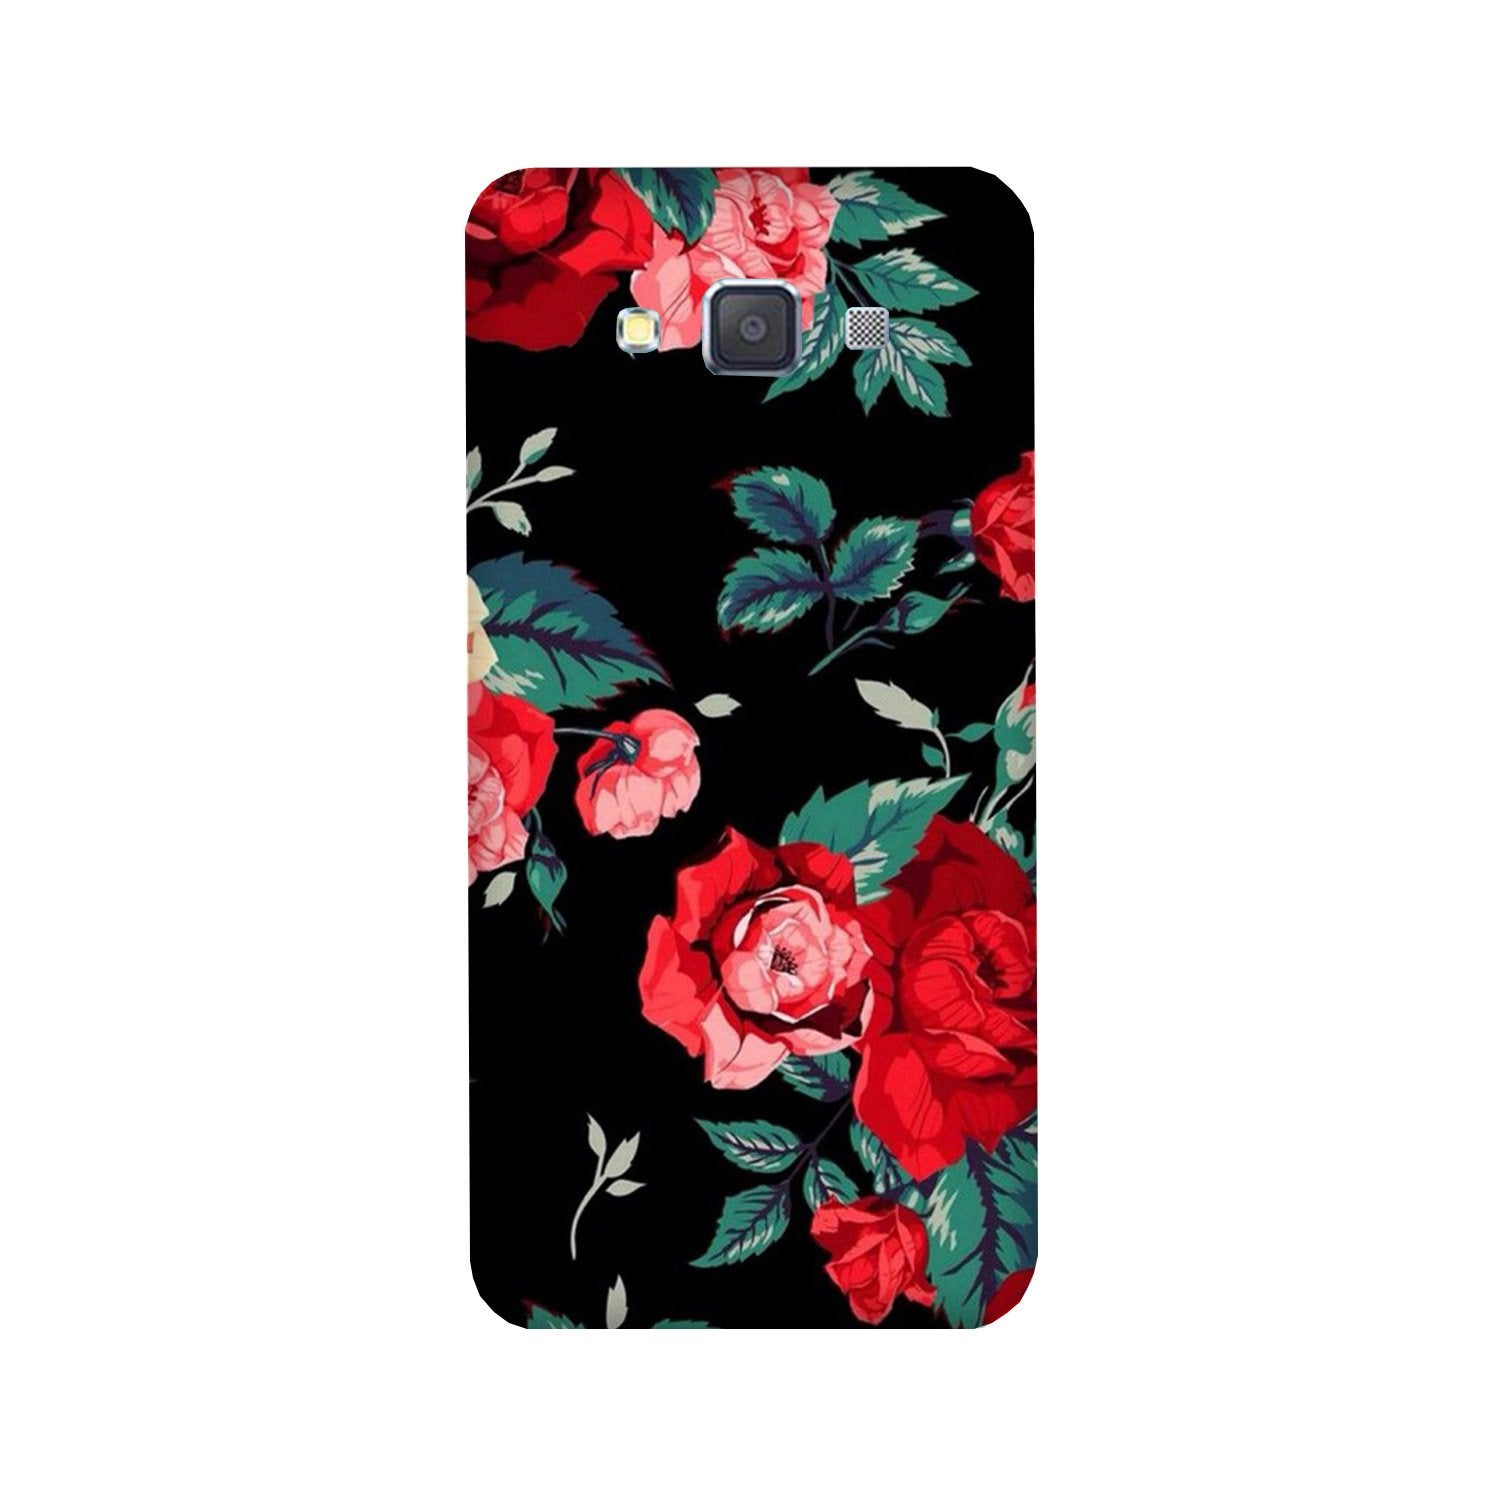 Red Rose2 Case for Galaxy E7